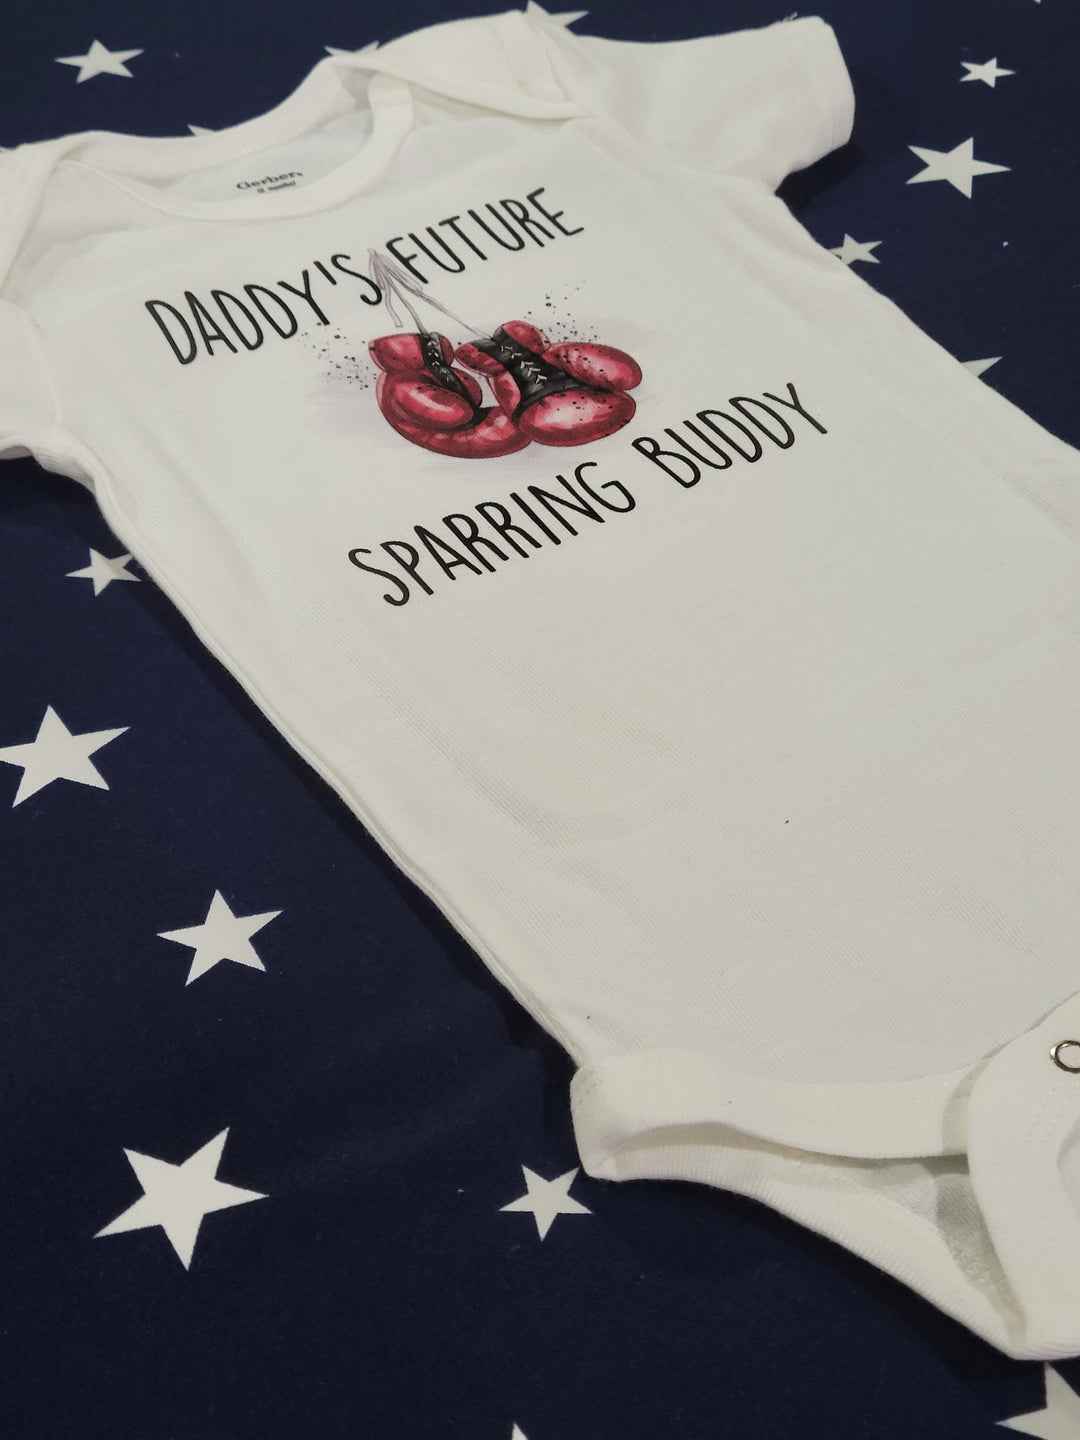 Boxing Sparring 3 - Baby Boy Girl Clothes Infant Bodysuit Funny Cute Newborn